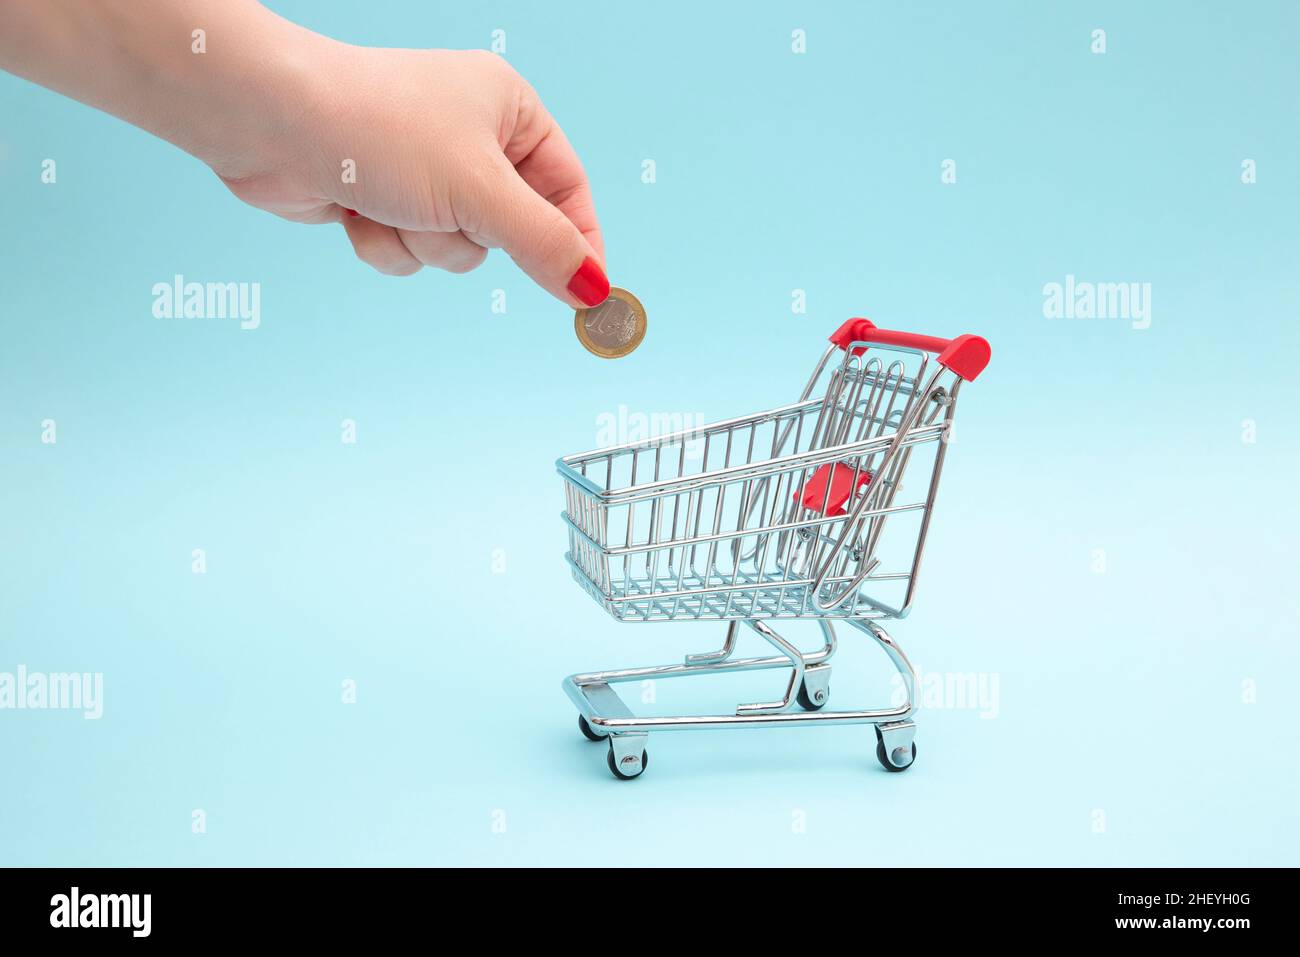 The hand puts a coin in the shopping cart. The concept of saving in stores and everyday grocery shopping Stock Photo